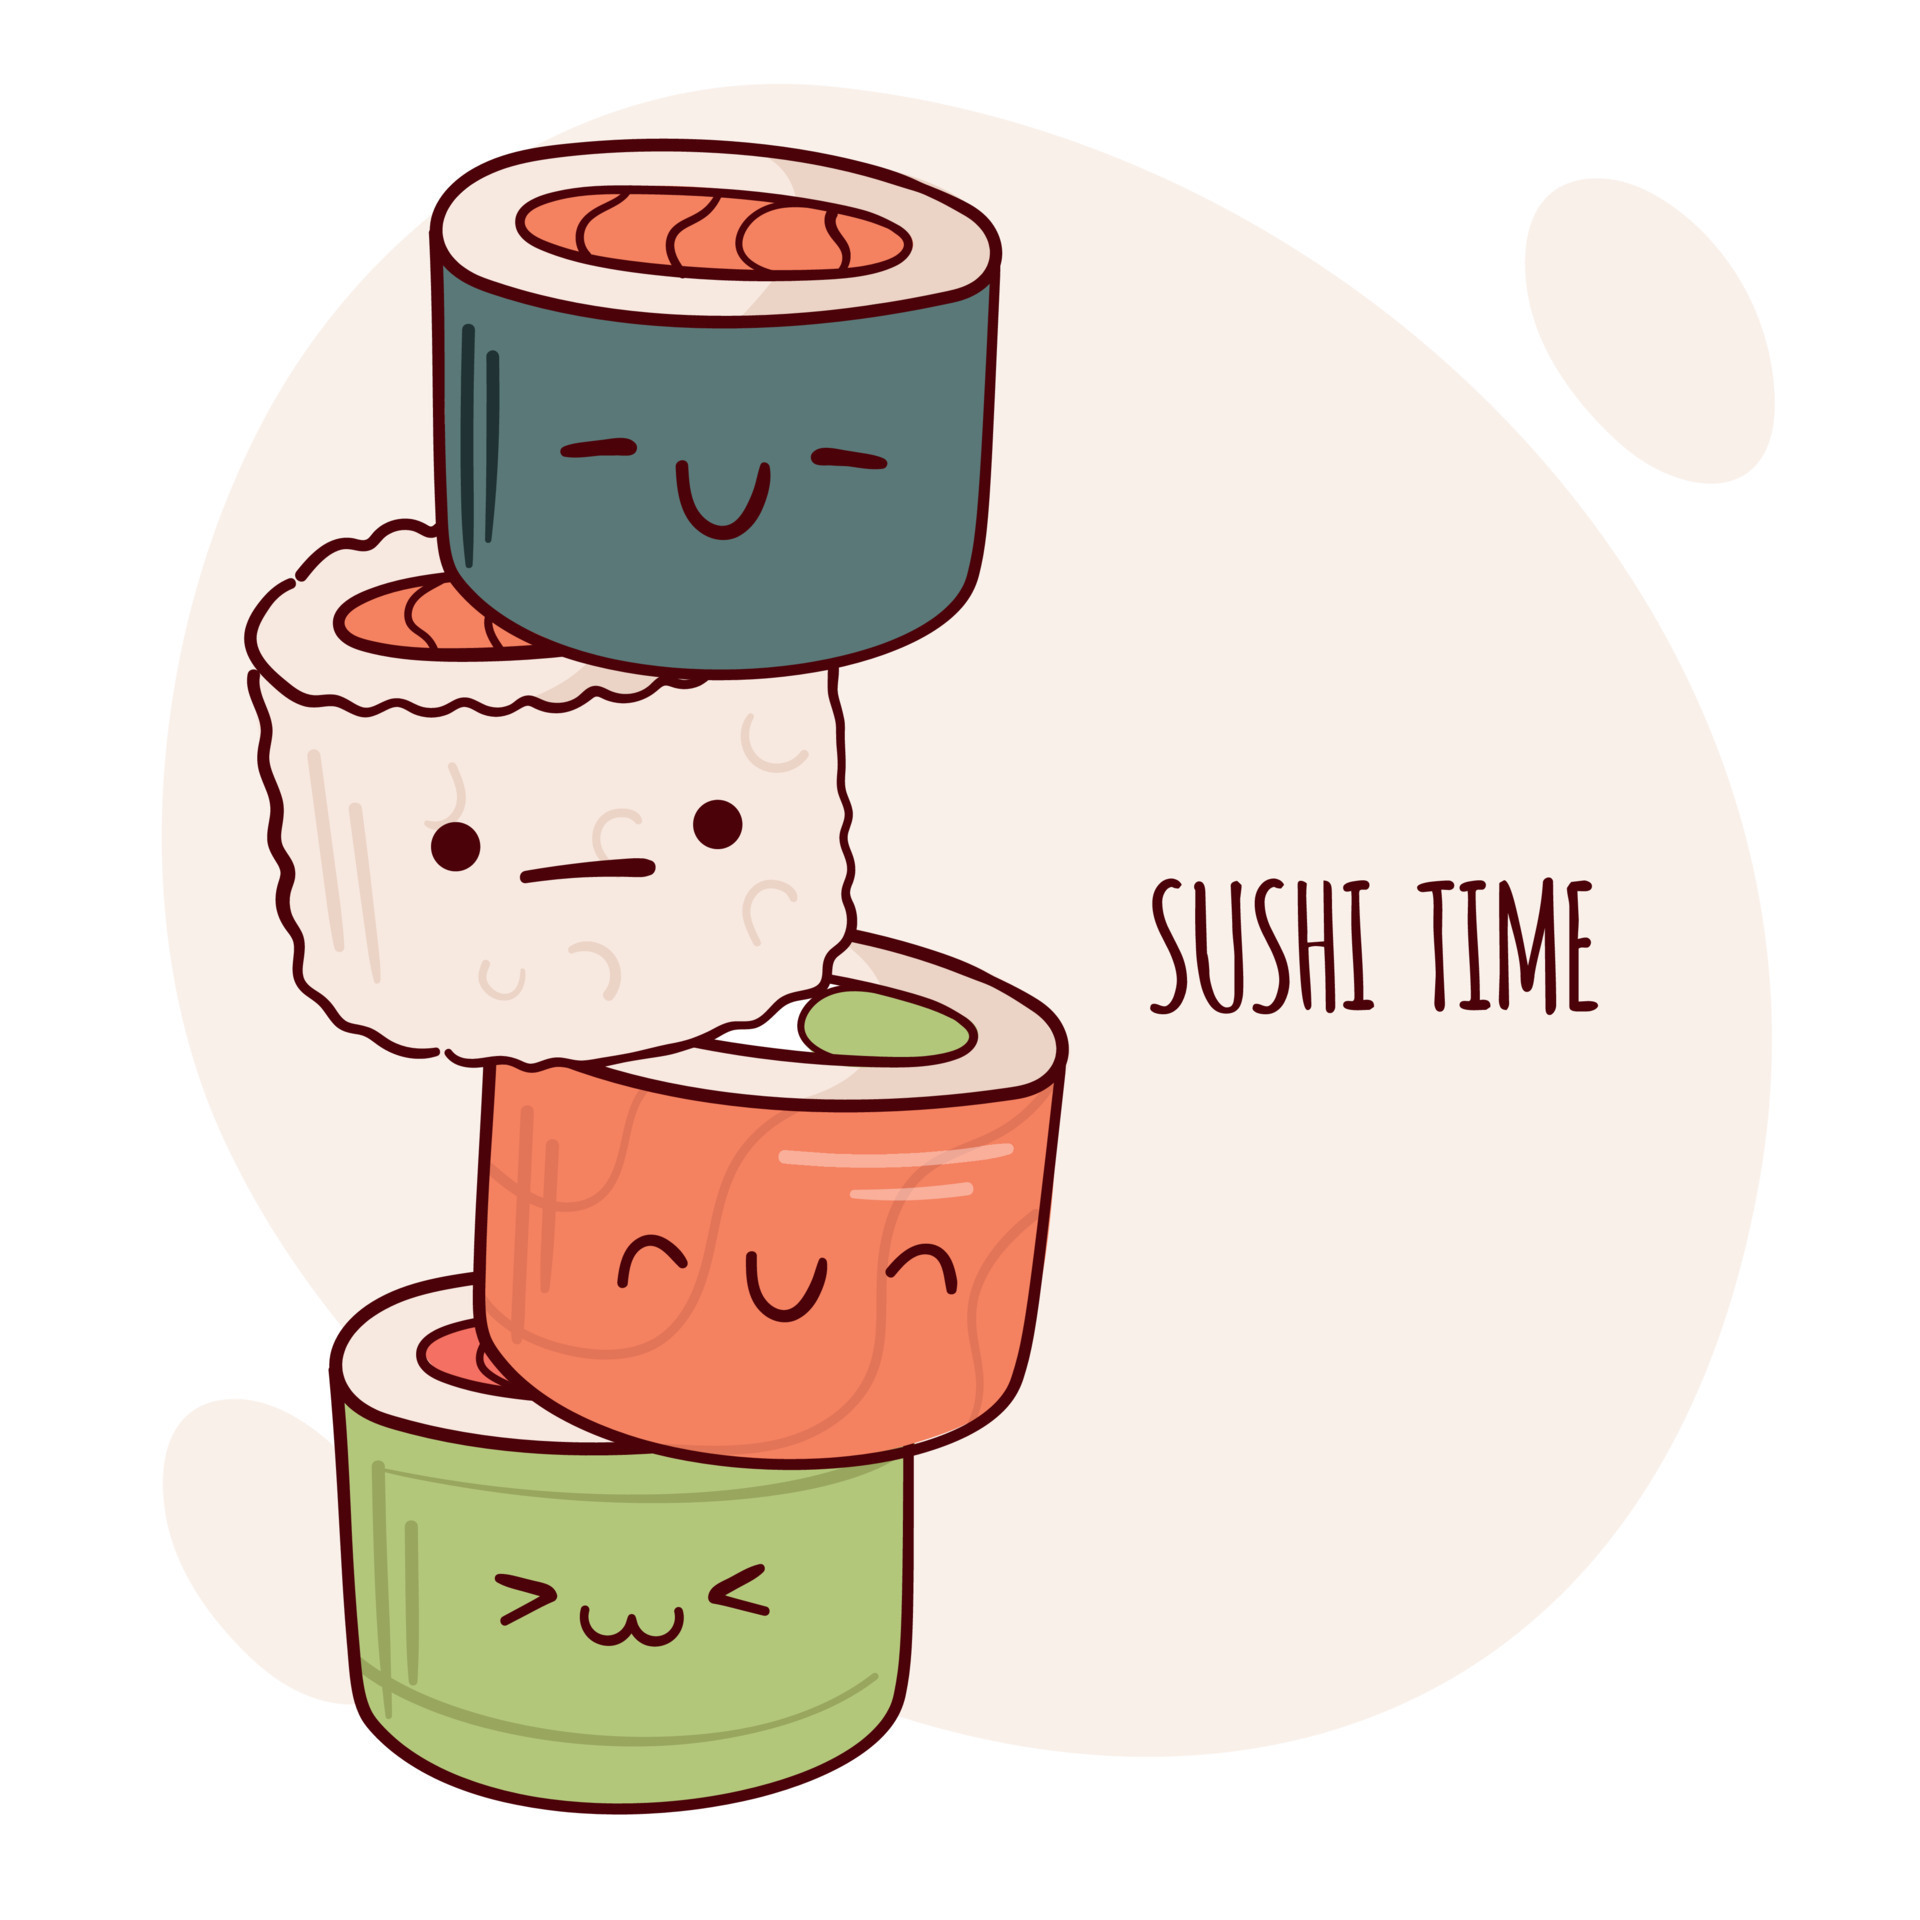 https://static.vecteezy.com/system/resources/previews/016/213/294/original/draw-funny-kawaii-sushi-roll-illustration-japanese-asian-traditional-food-cooking-menu-concept-doodle-cartoon-style-vector.jpg